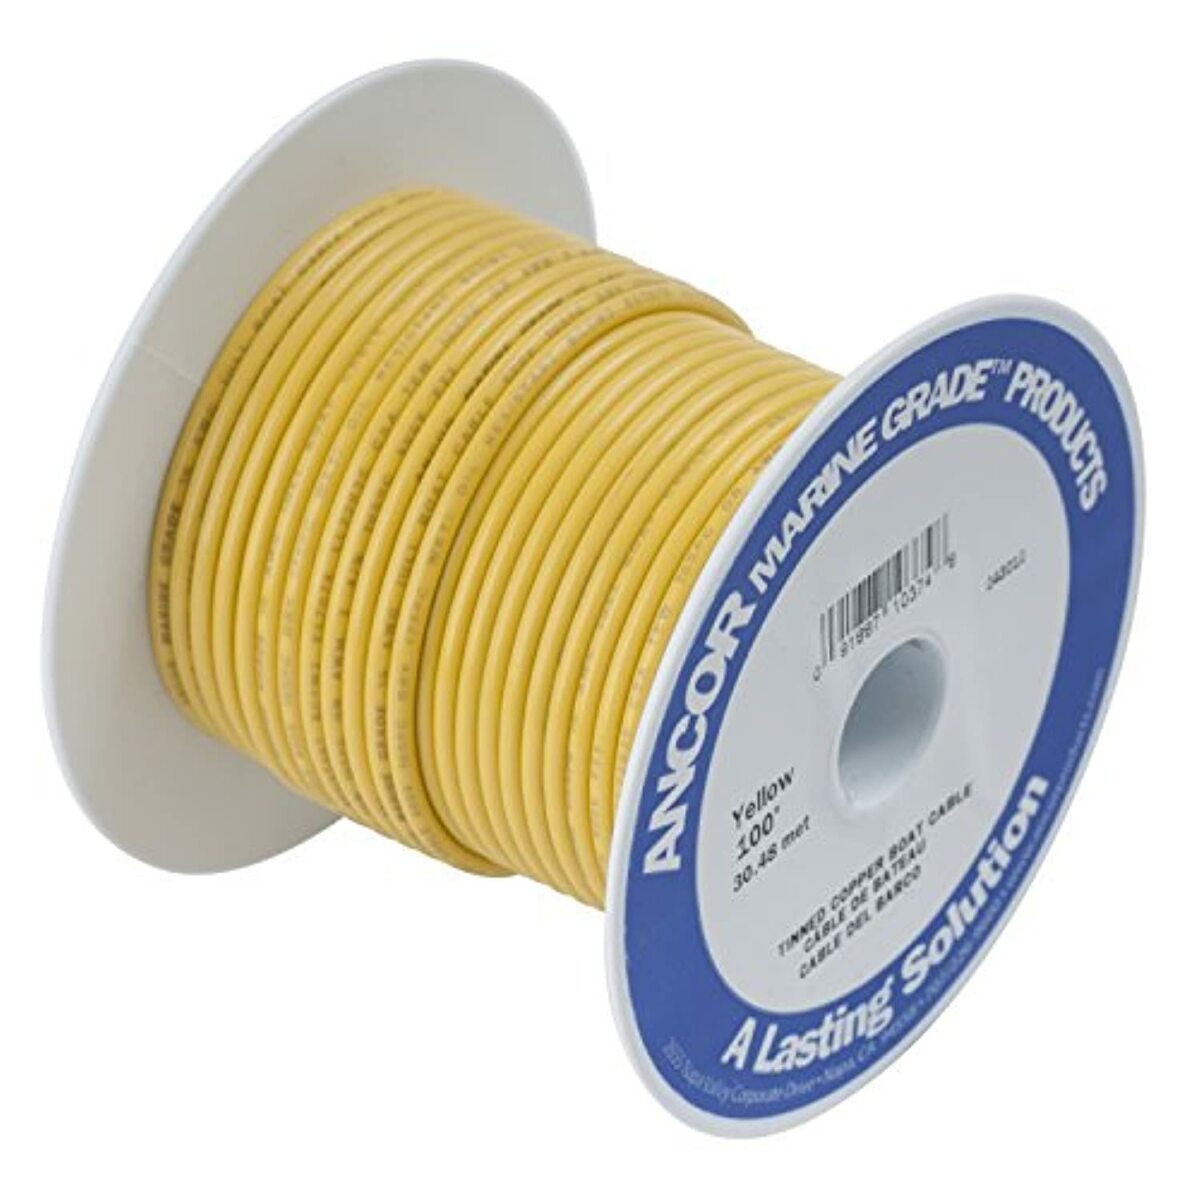 Ancor 103010 Power Products Tinned Copper Wire, 16 AWG (1mm2), Yellow, 100 ft. - image 3 of 6